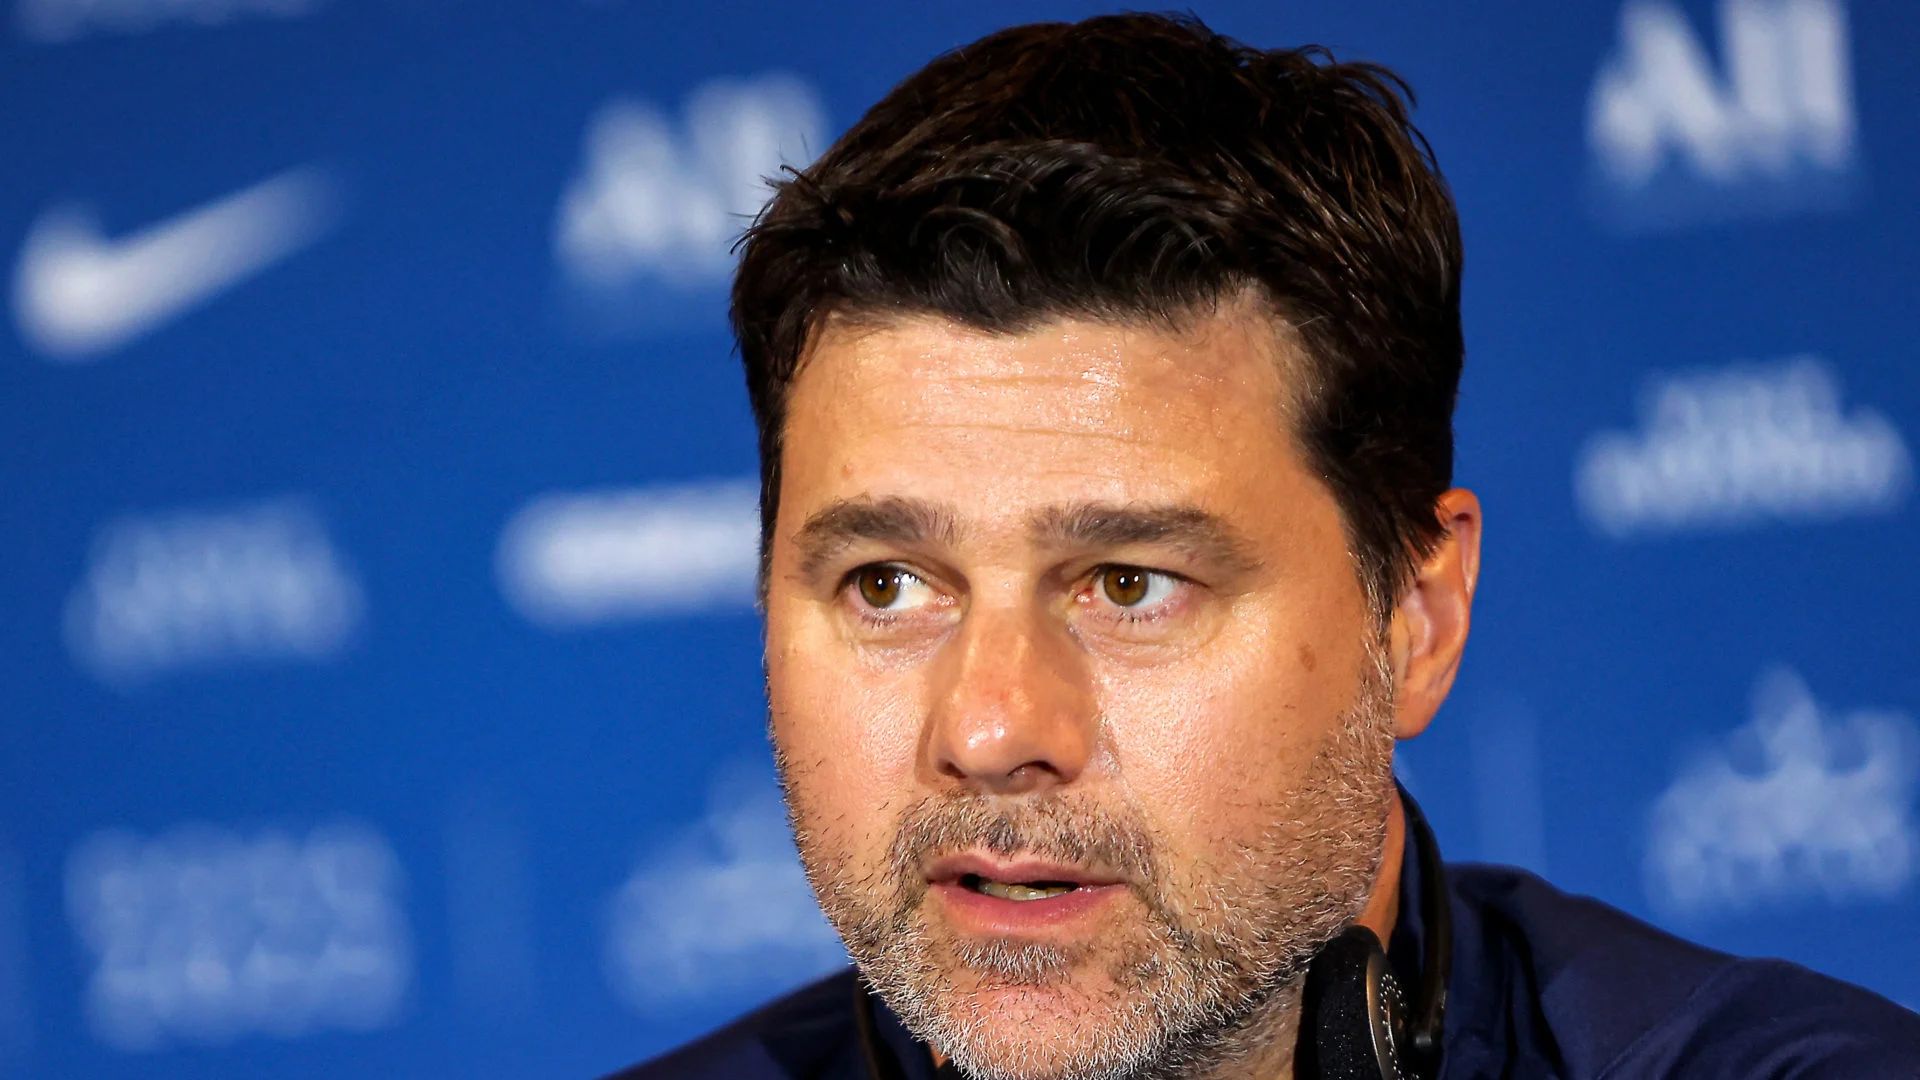 If Pochettino approves the summer deal, Chelsea could repeat £58m blunder.